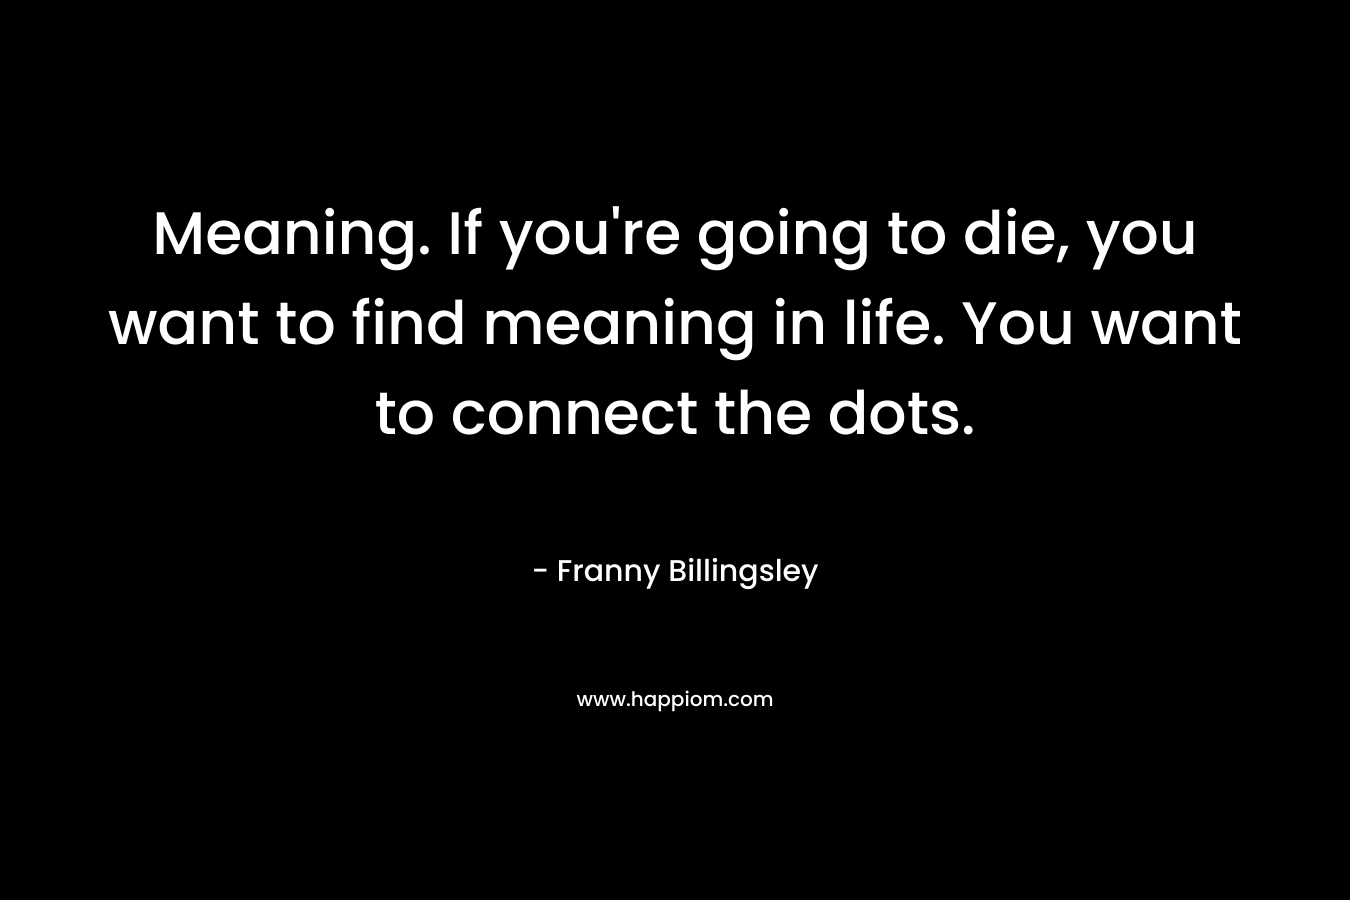 Meaning. If you’re going to die, you want to find meaning in life. You want to connect the dots. – Franny Billingsley